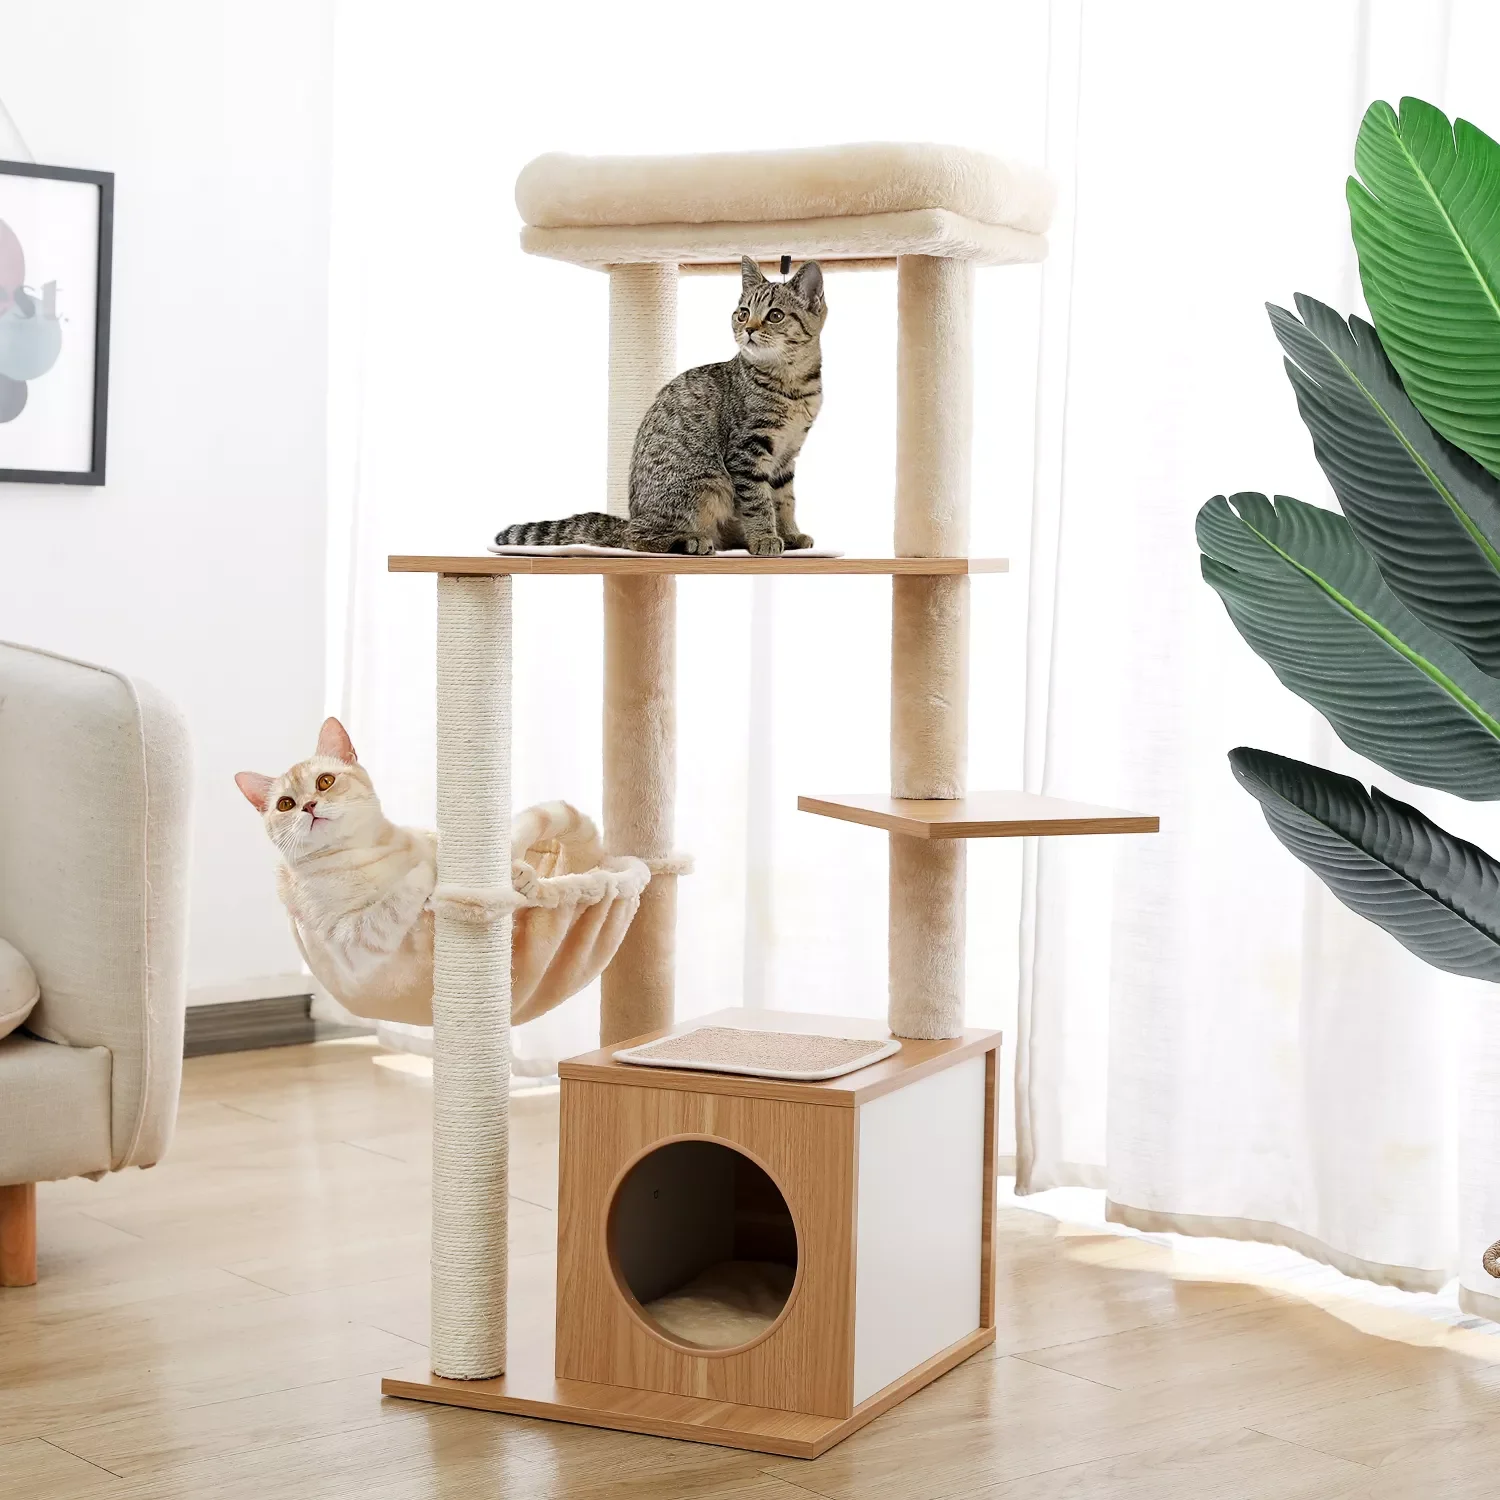 2022New Modern Cat Tree Cat Climbing Tower with Sisal Scratching Posts Luxury Large Hammock Condo and Top Perch with Playing Bal